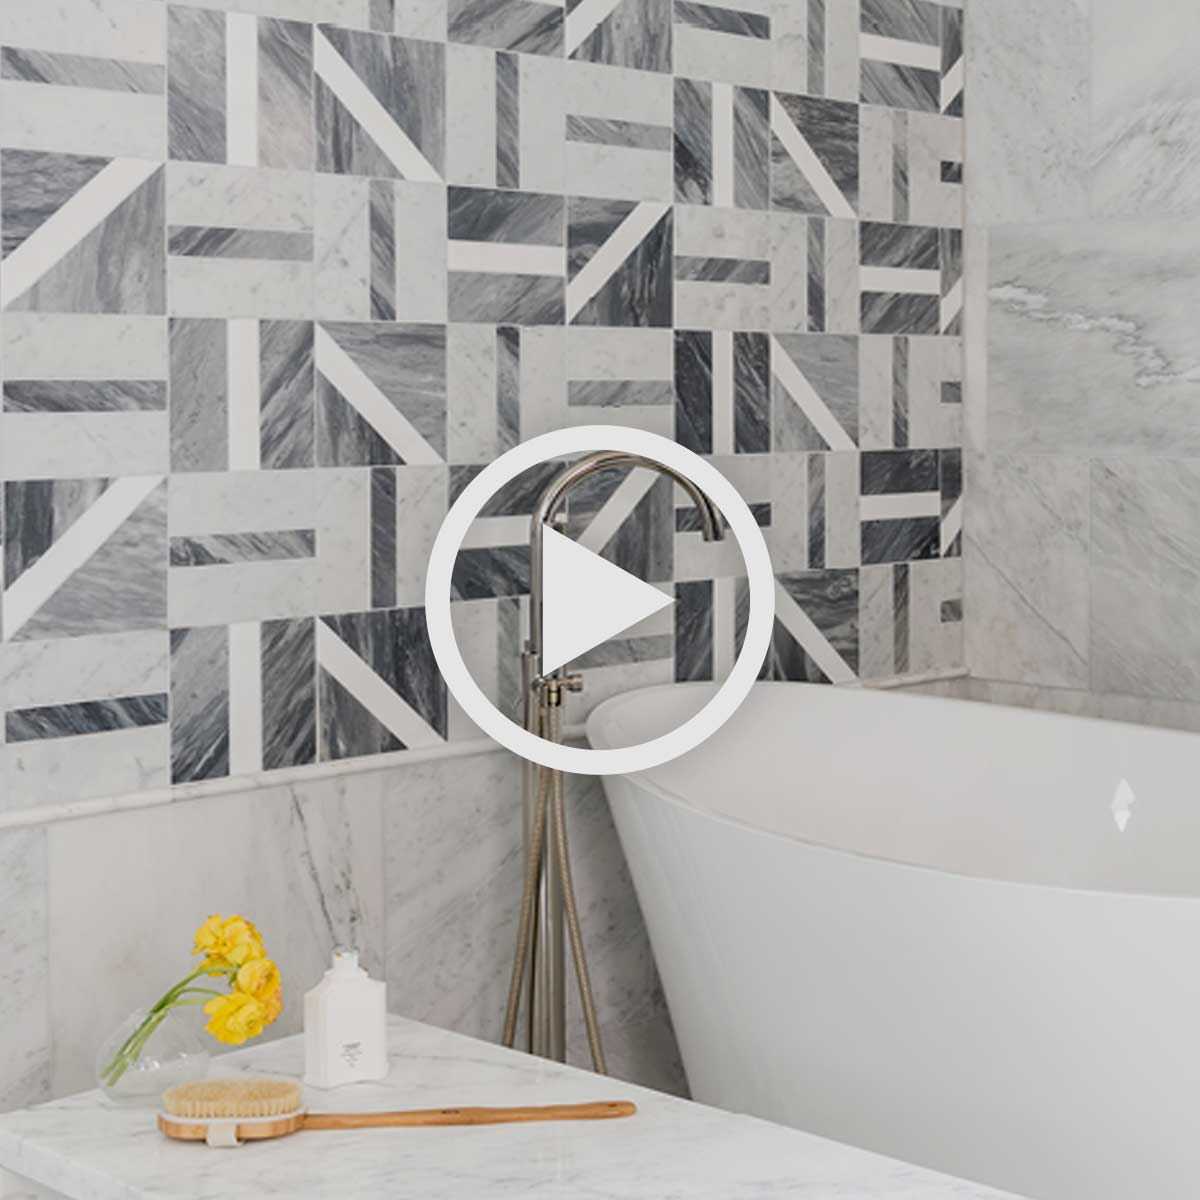 Using Tile To Transform Your Space